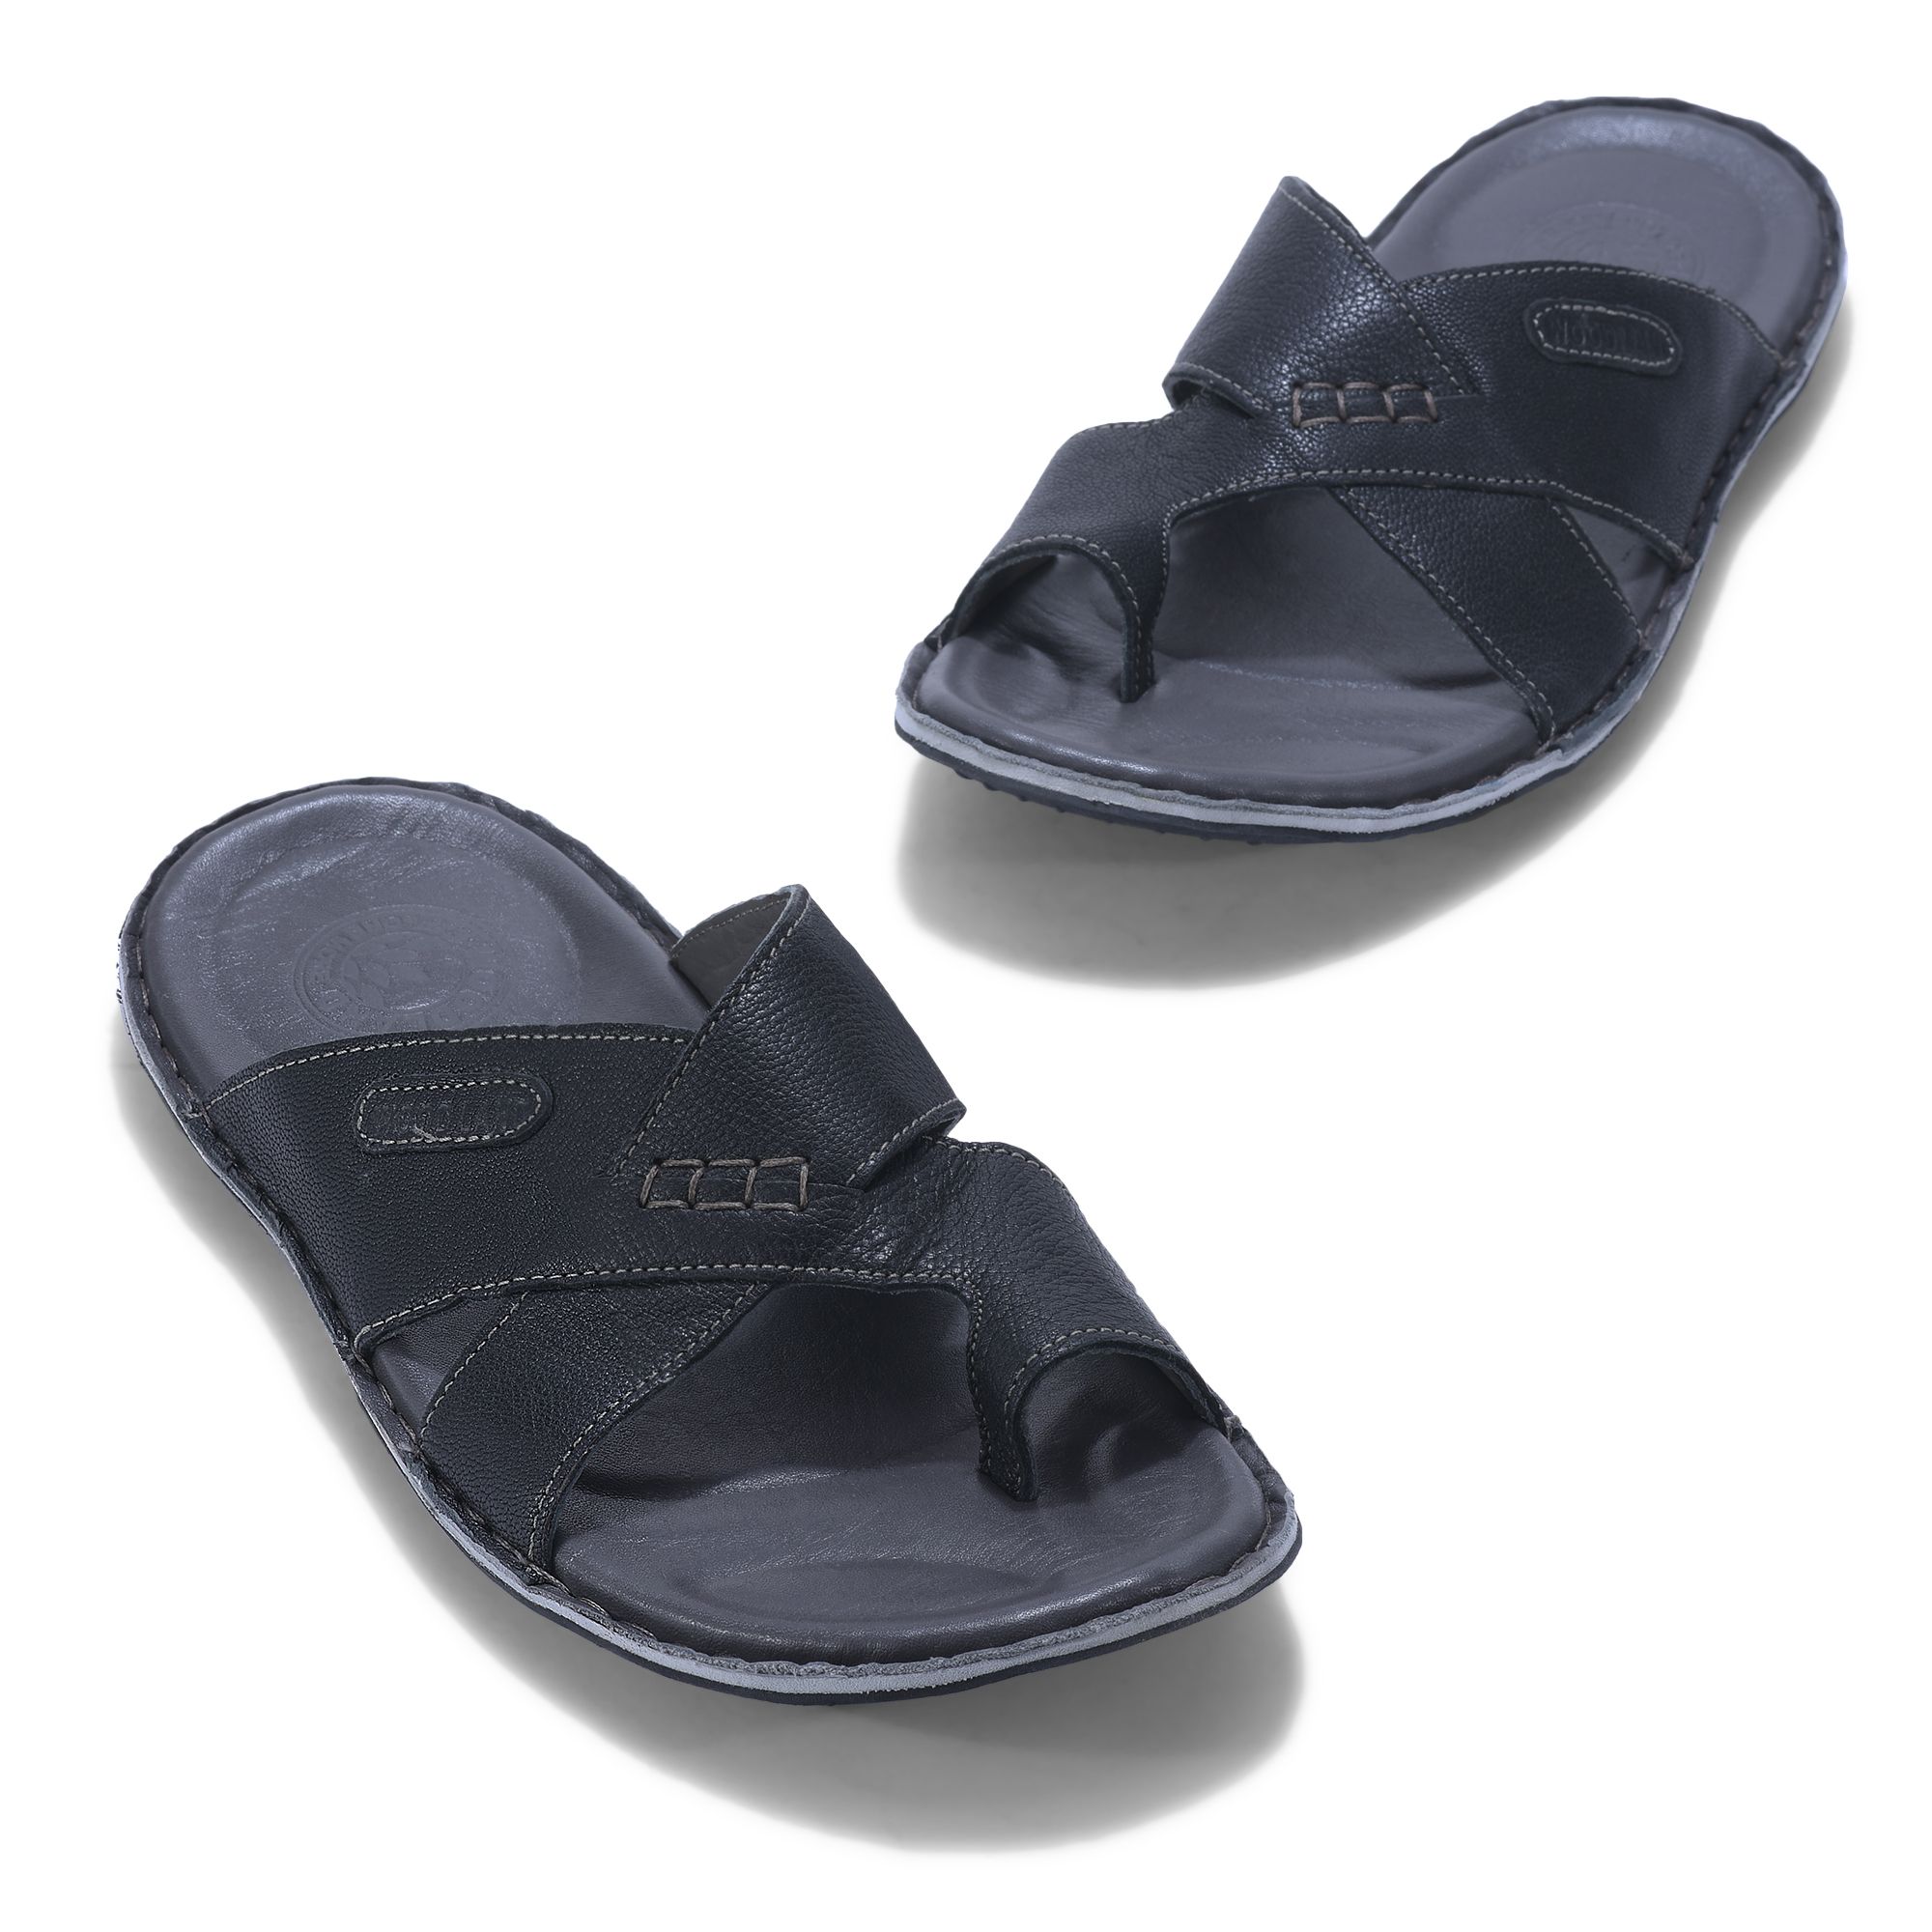 Woodland BLACK casual slippers